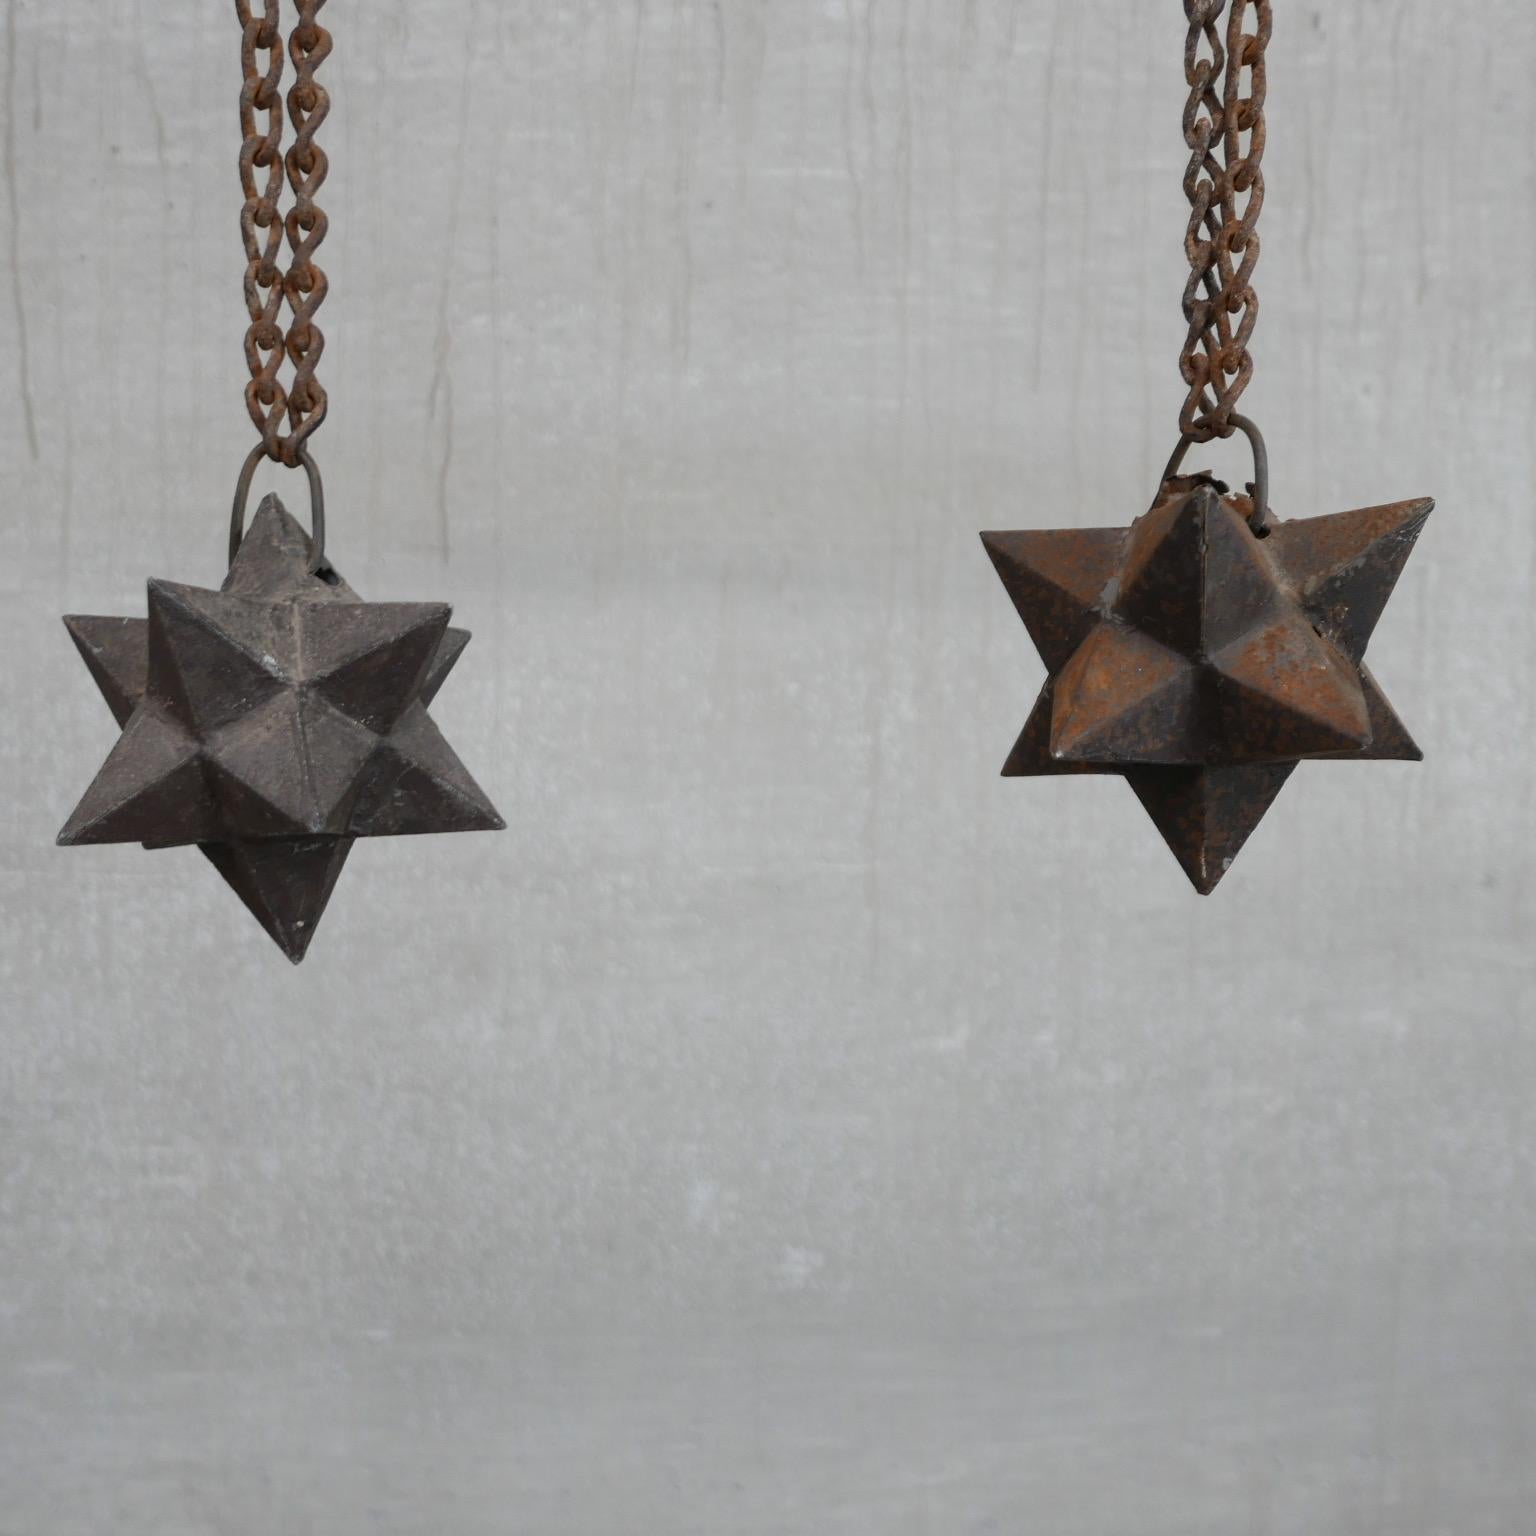 19th Century Antique French Cast Iron Geometric 'Etoile' Star Curios For Sale